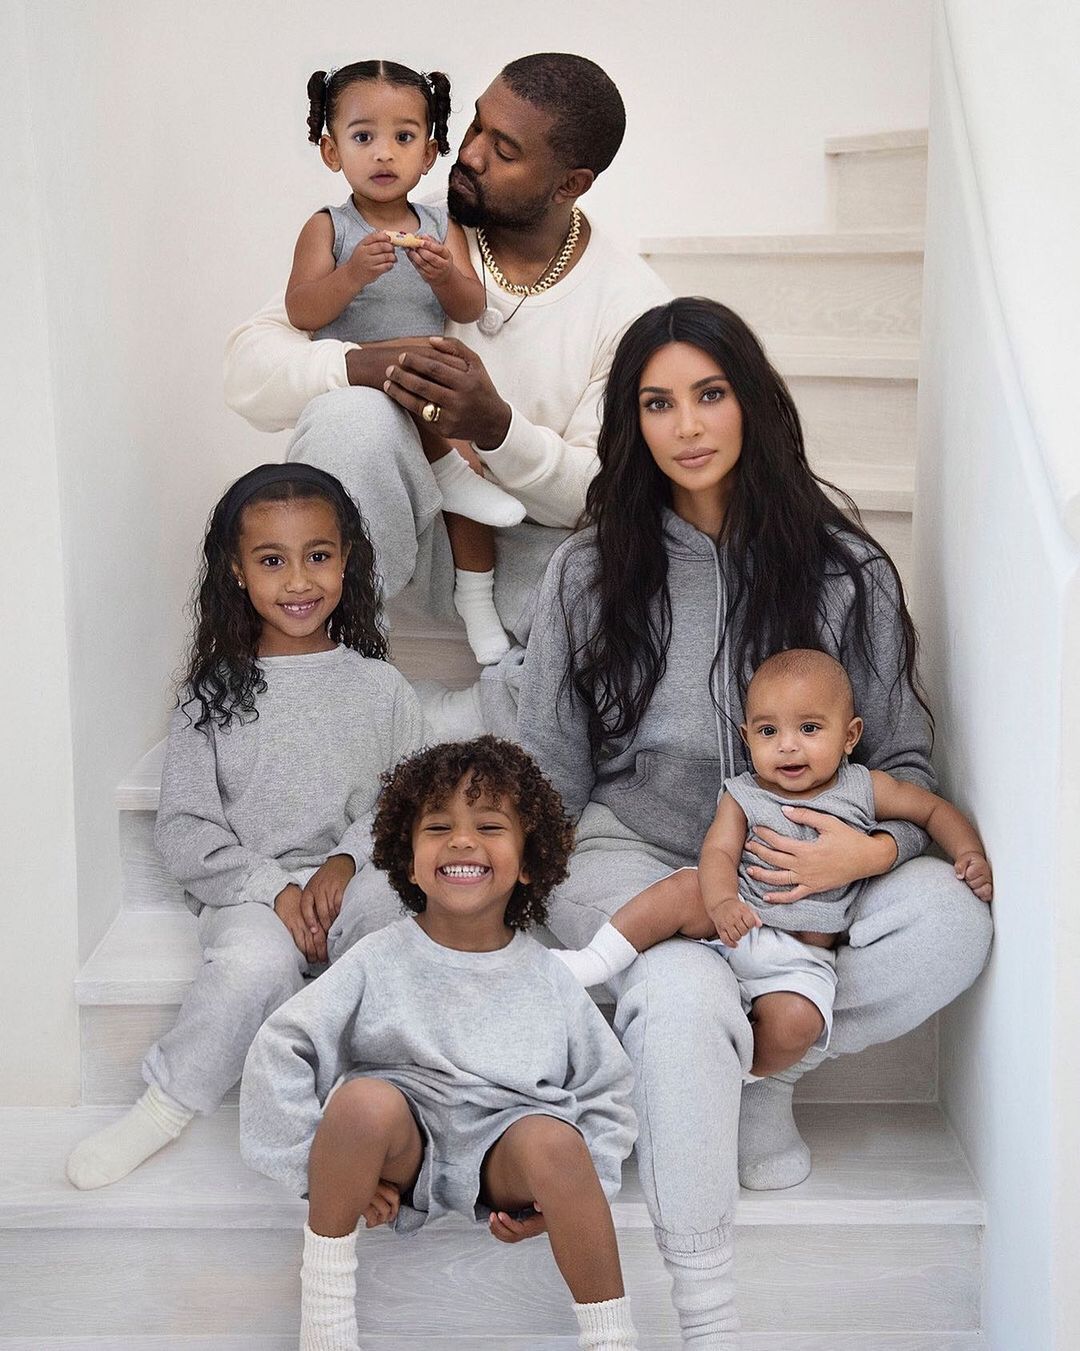 Kim filed for divorce from Kanye in 2021 after nearly seven years of marriage and four kids together